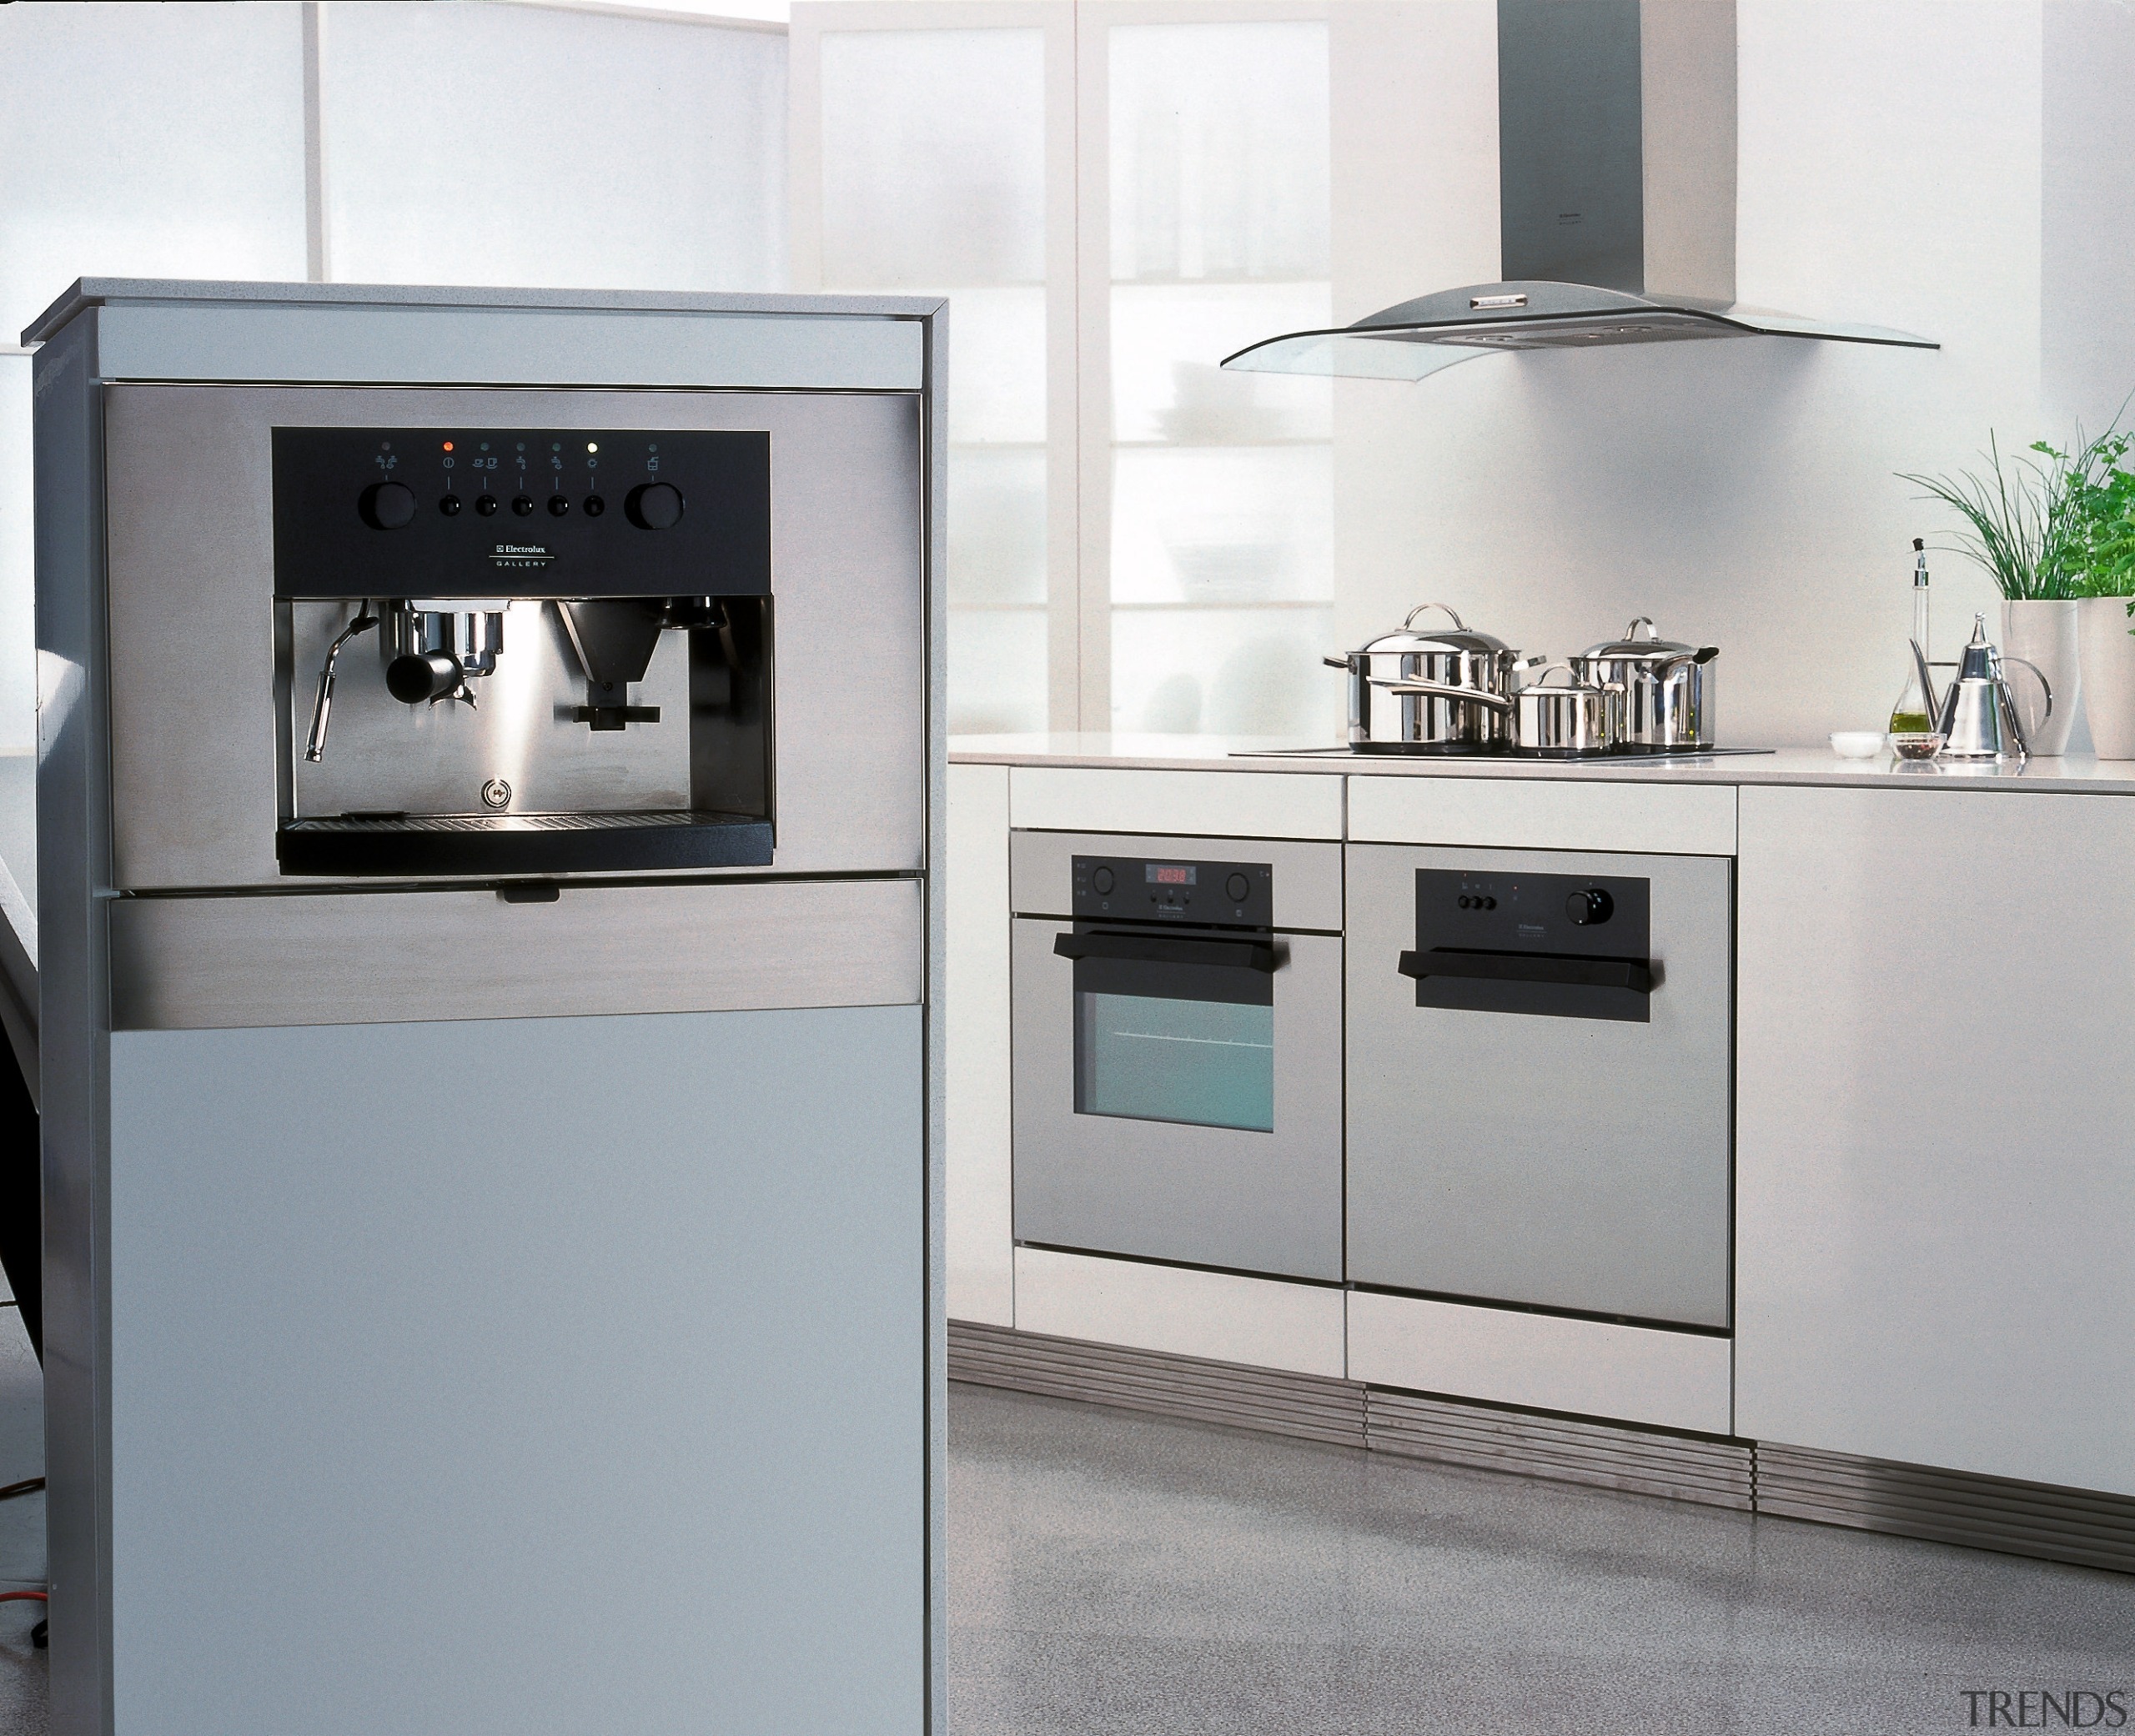 A photograph of a European styled kitchen. The gas stove, home appliance, kitchen, kitchen appliance, kitchen stove, major appliance, oven, product, product design, refrigerator, small appliance, gray, white